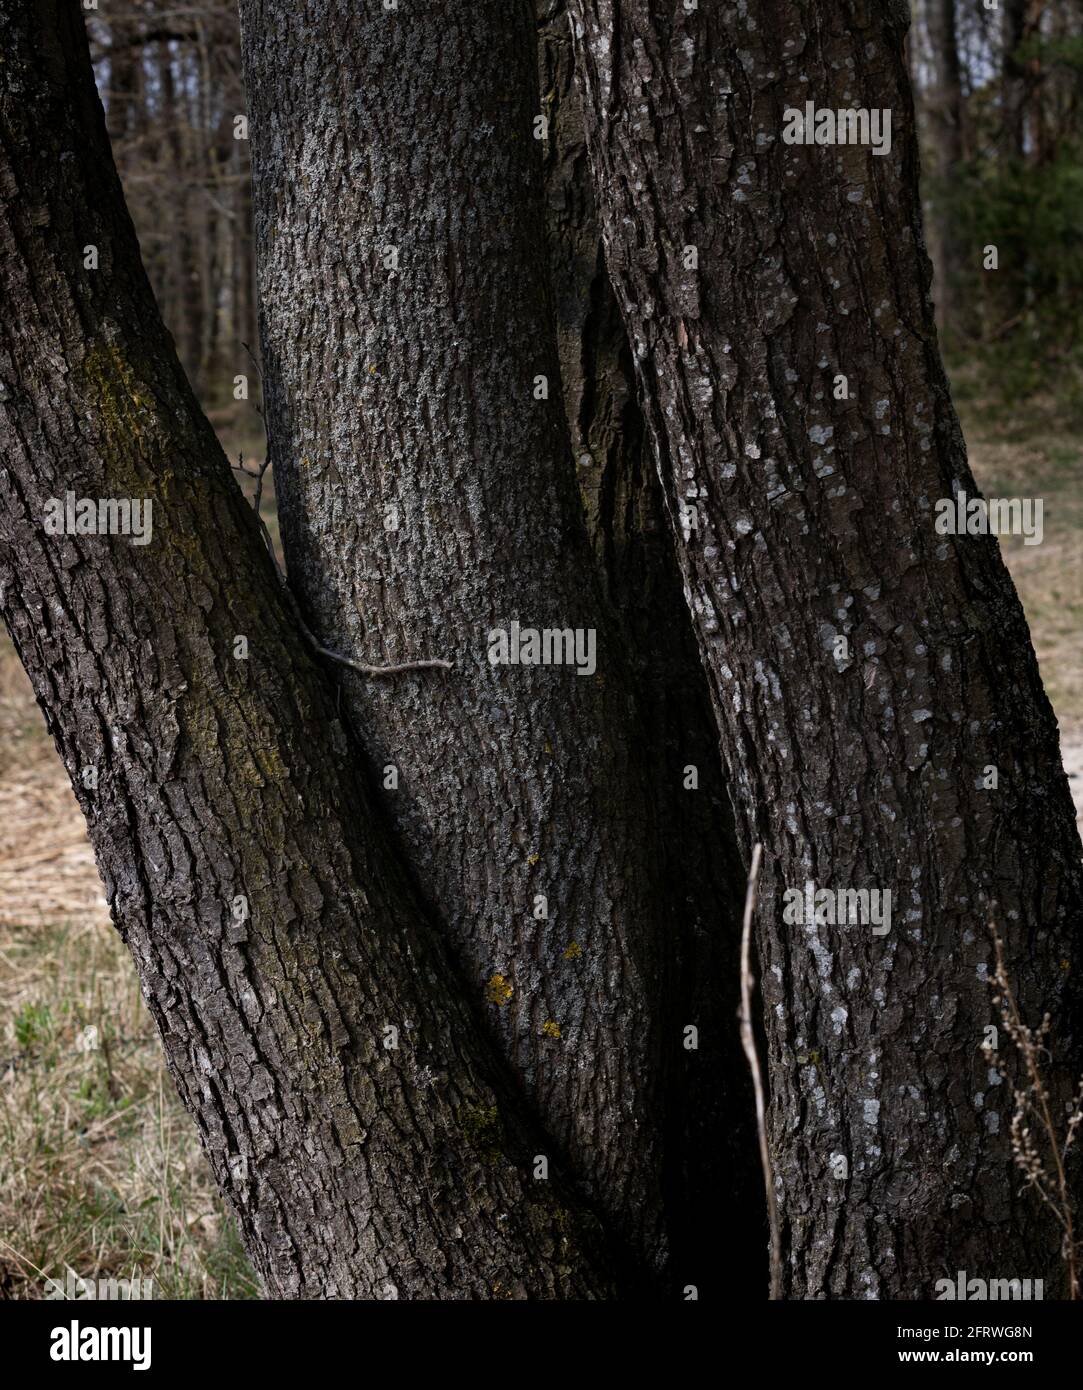 Four old trees in the forest, growing from one root, intertwined like snakes. Black, green, gray and mossy. The sun shines on them. Stock Photo